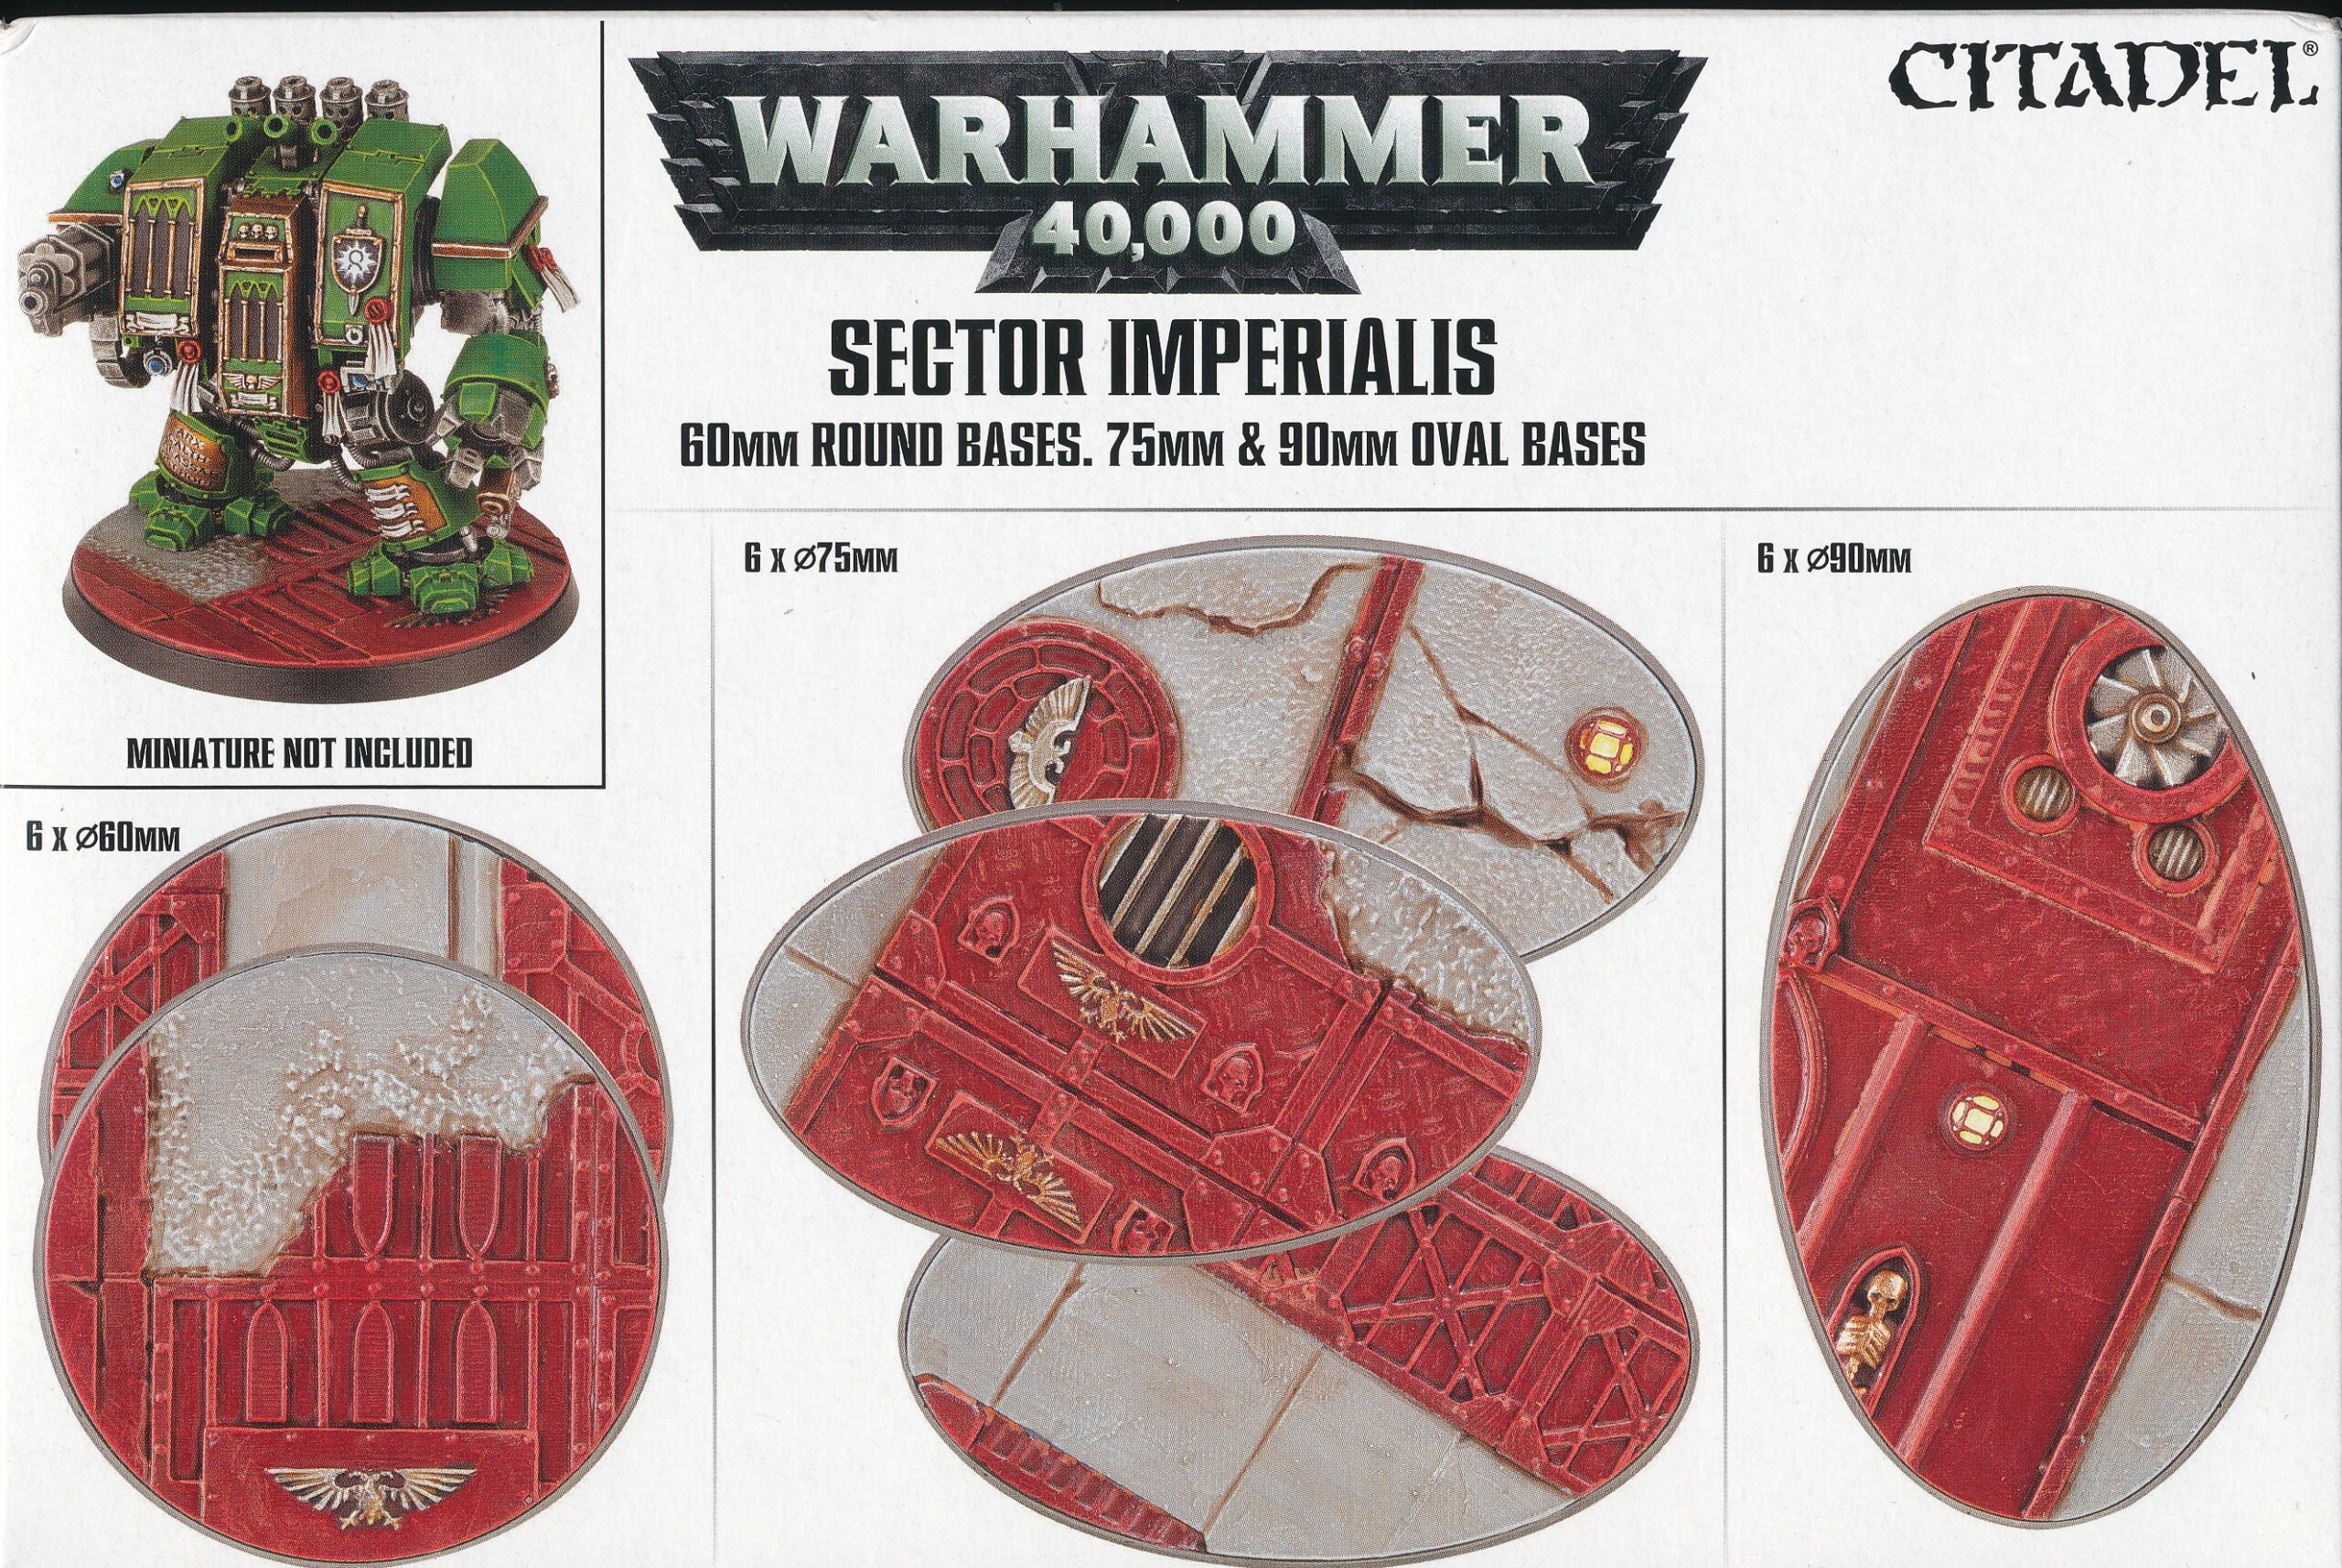 Warhammer 40.000 Sector Imperialis 60mm Round Bases. 75mm & 90mm Oval bases. (66-93)